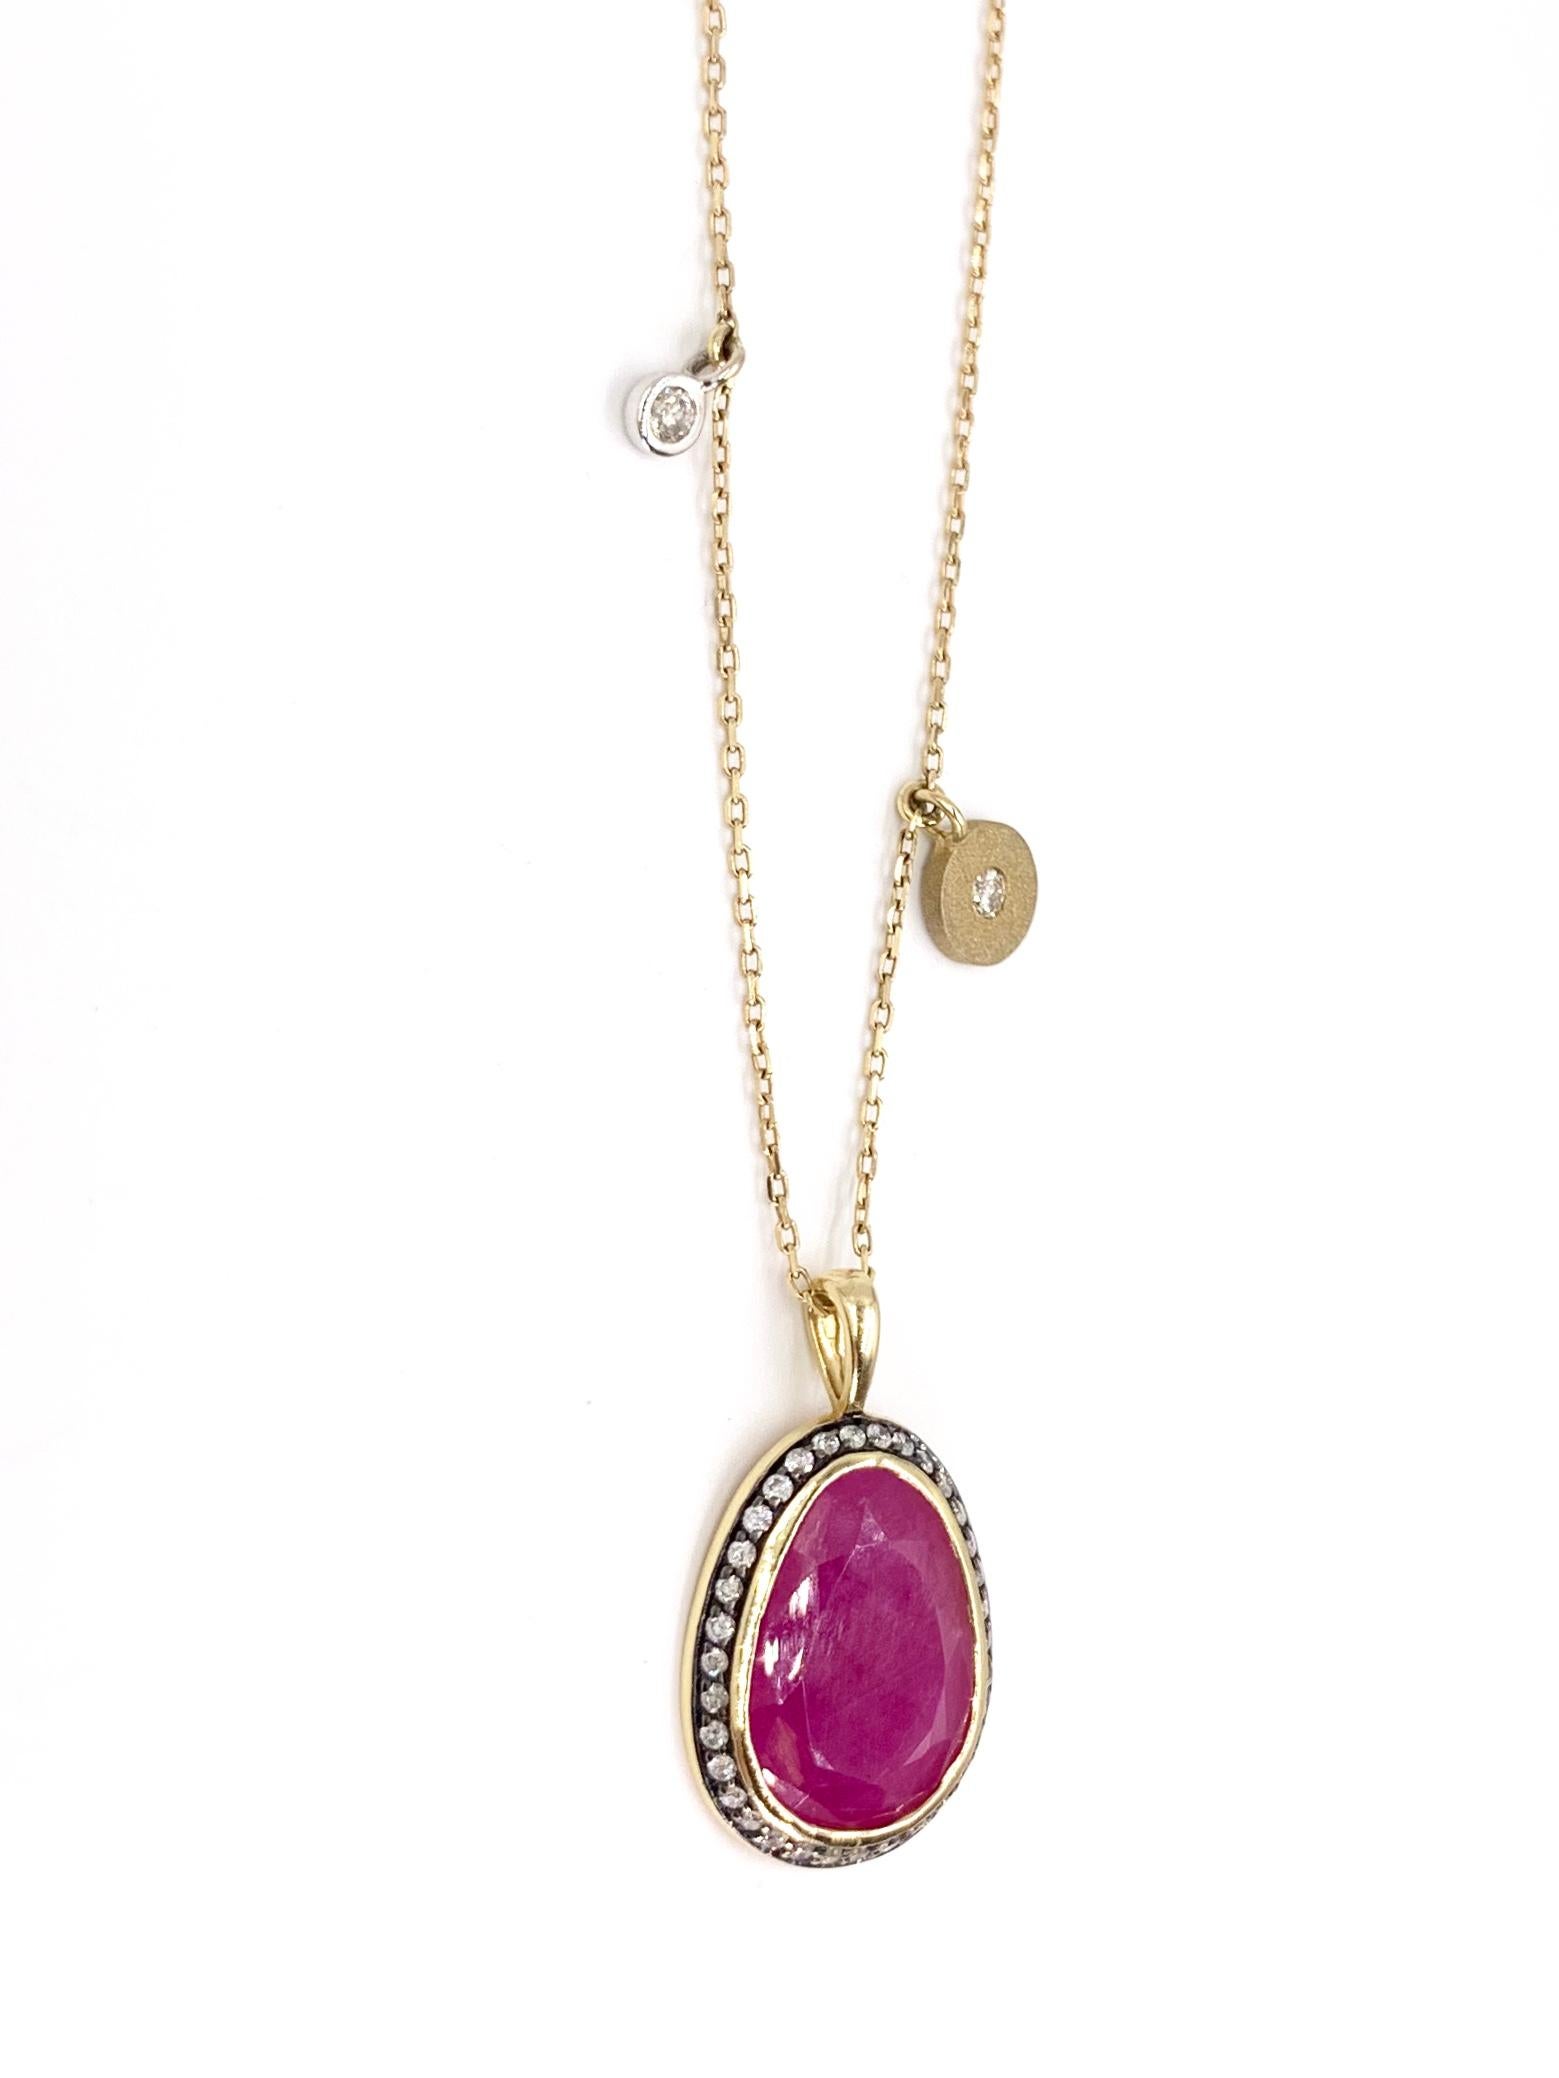 Contemporary Yellow Gold Sliced Ruby and Diamond Pendant Necklace